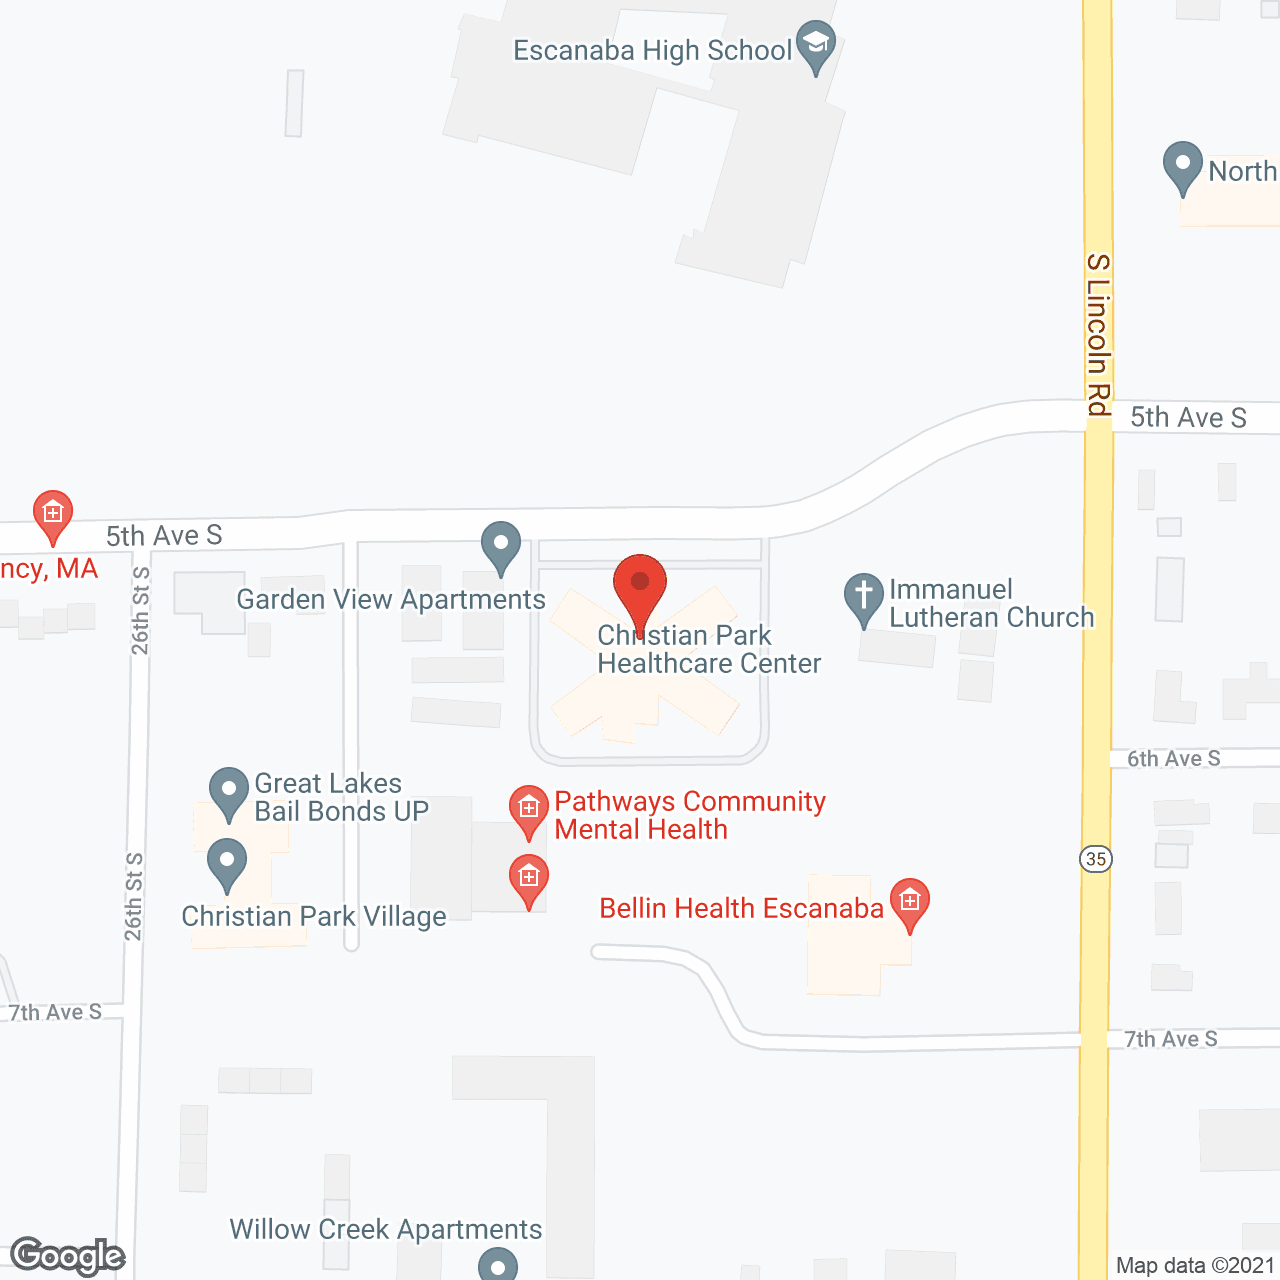 Christian Park Health Care Ctr in google map